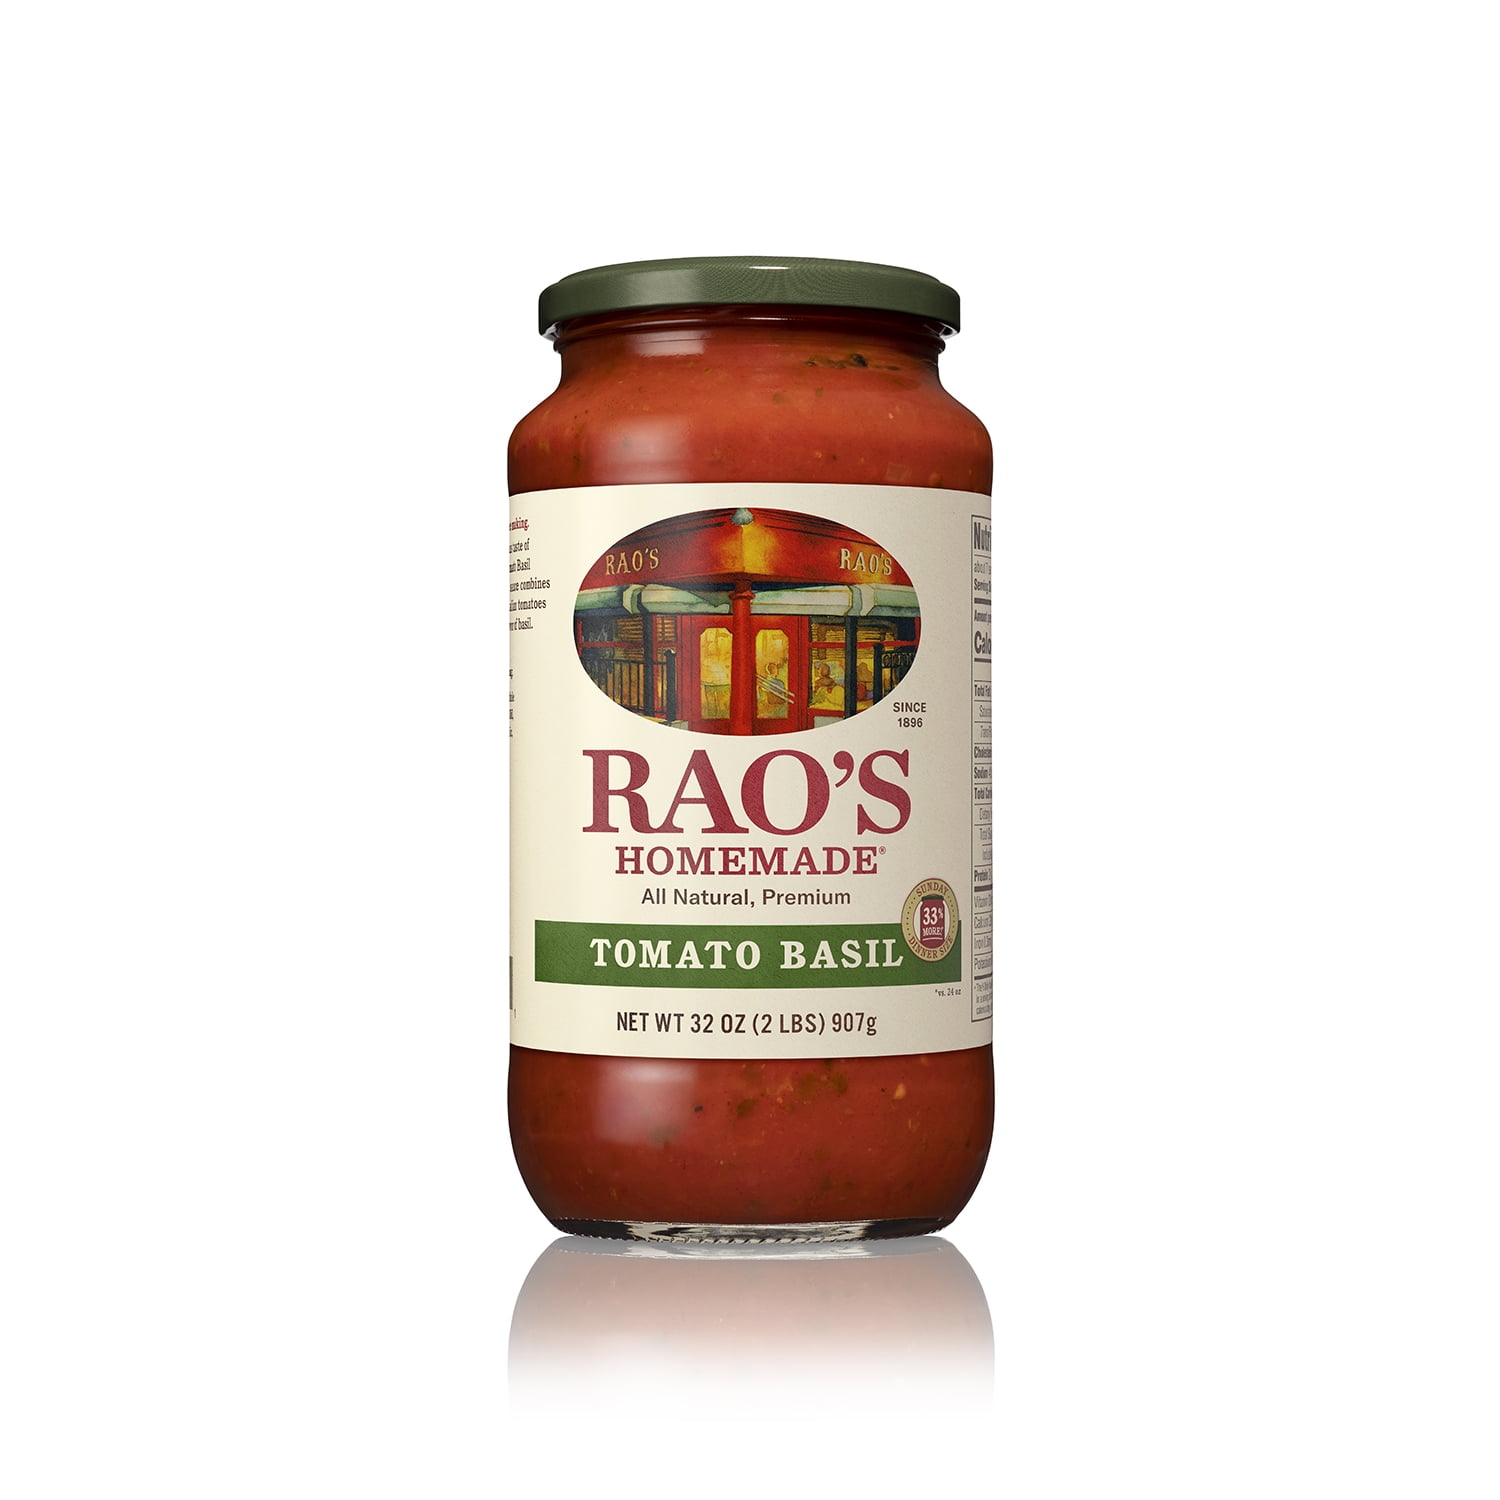 Rao's Homemade Tomato Sauce | Tomato Basil | 32 oz | Versatile Pasta Sauce | Carb Conscious, Keto Friendly | All Natural | Premium Quality | Made with Slow-Simmered Italian Tomatoes & Basil